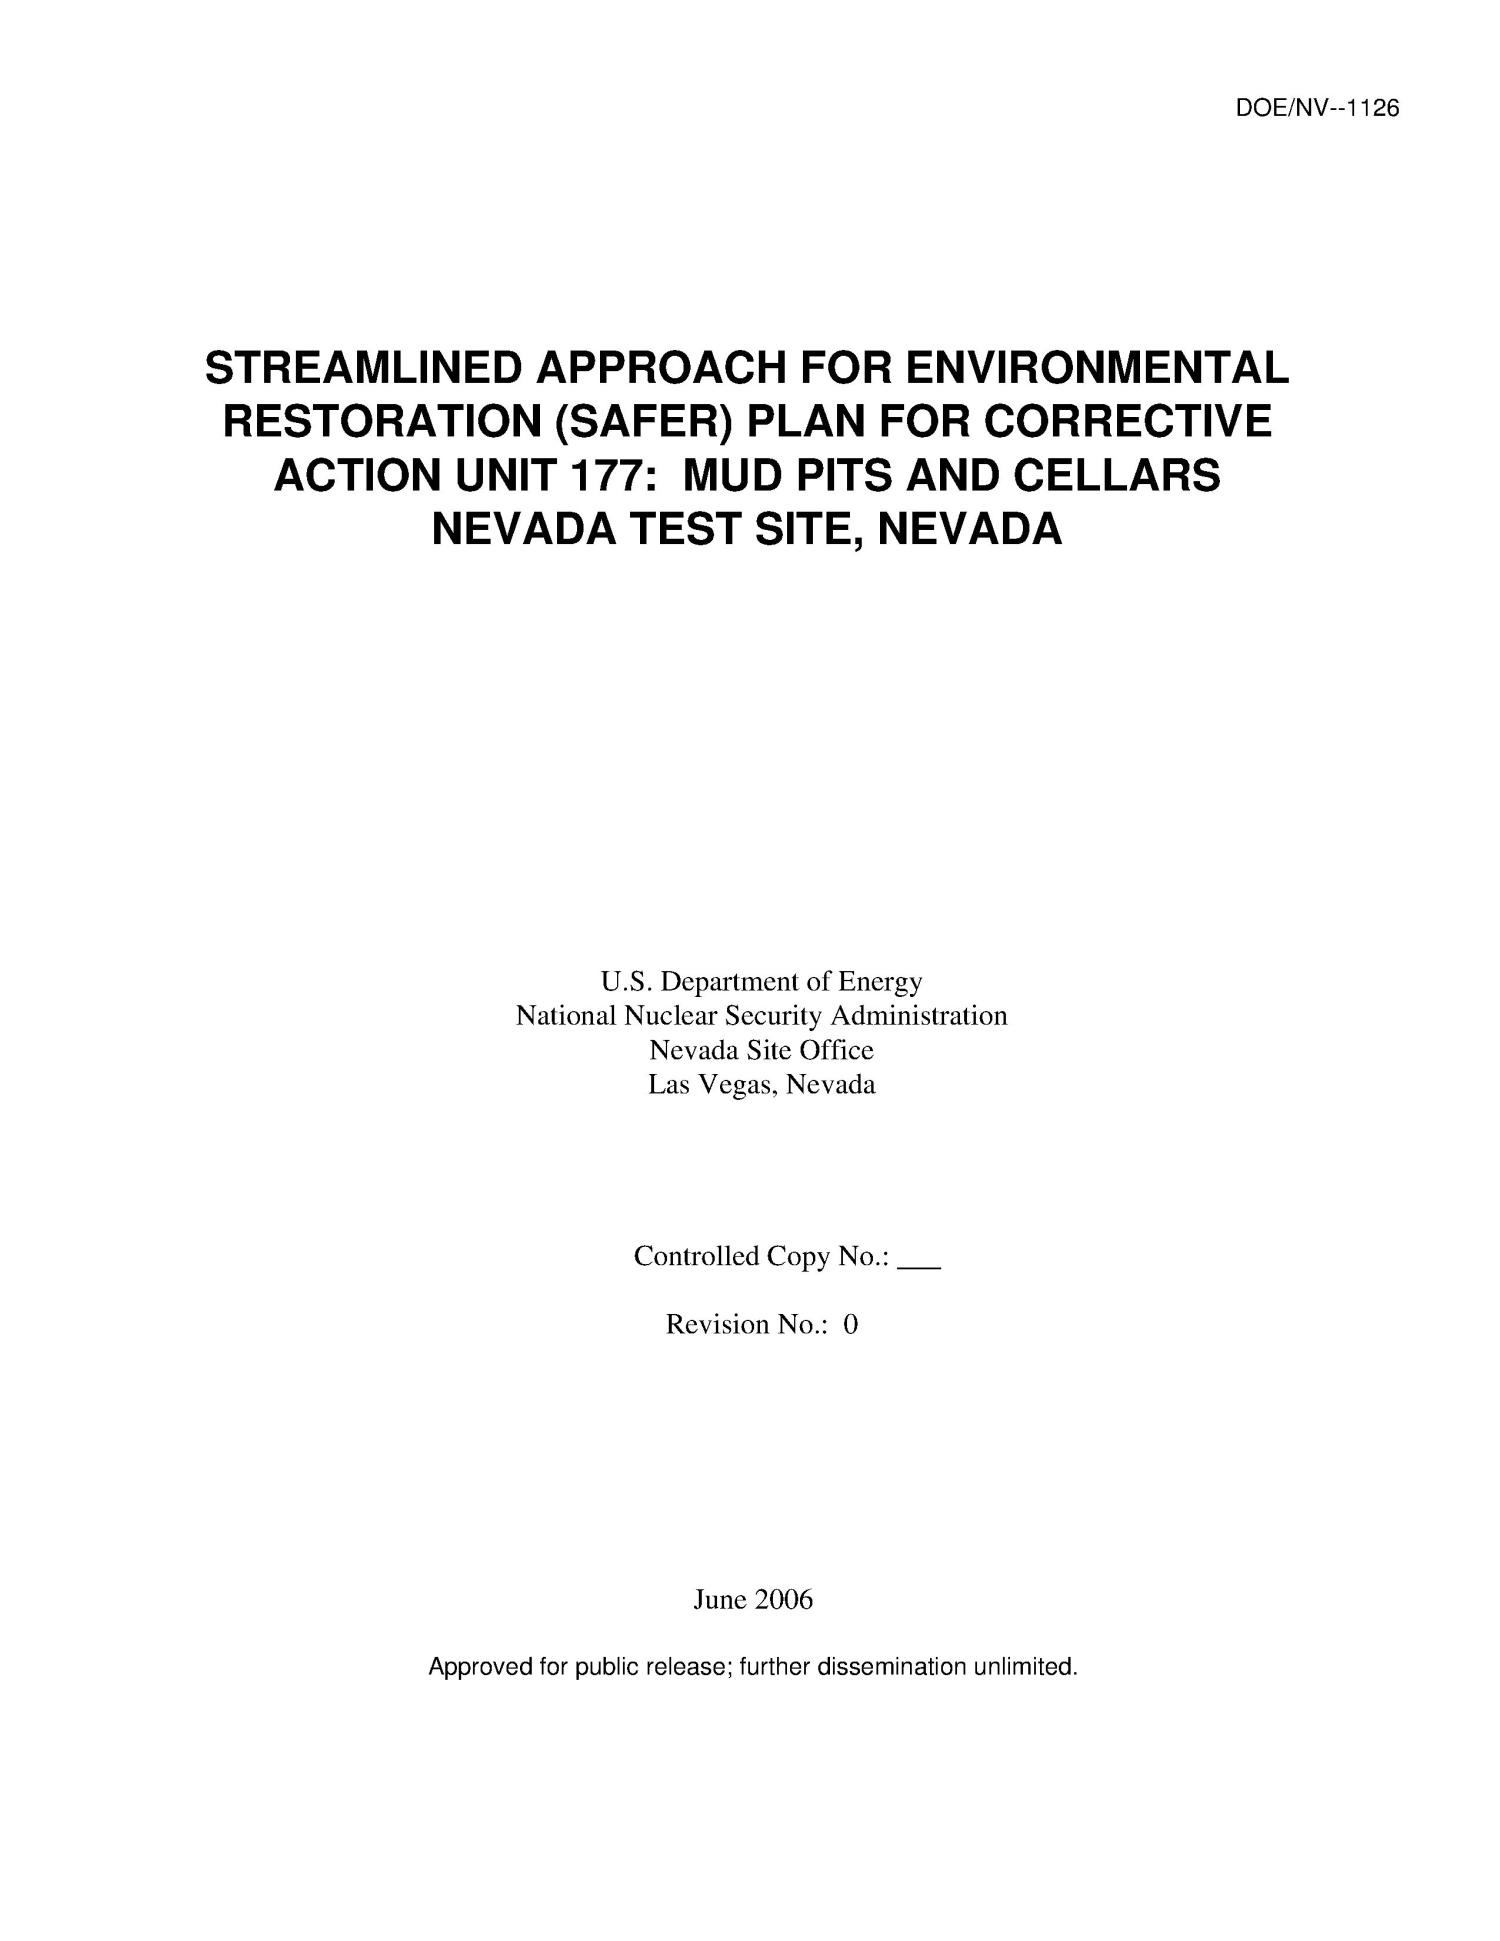 Streamlined Approach for Environmental Restoration (SAFER) Plan for Corrective Action Unit 177: Mud Pits and Cellars, Nevada Test Site, Nevada, Rev. No.: 0
                                                
                                                    [Sequence #]: 3 of 161
                                                